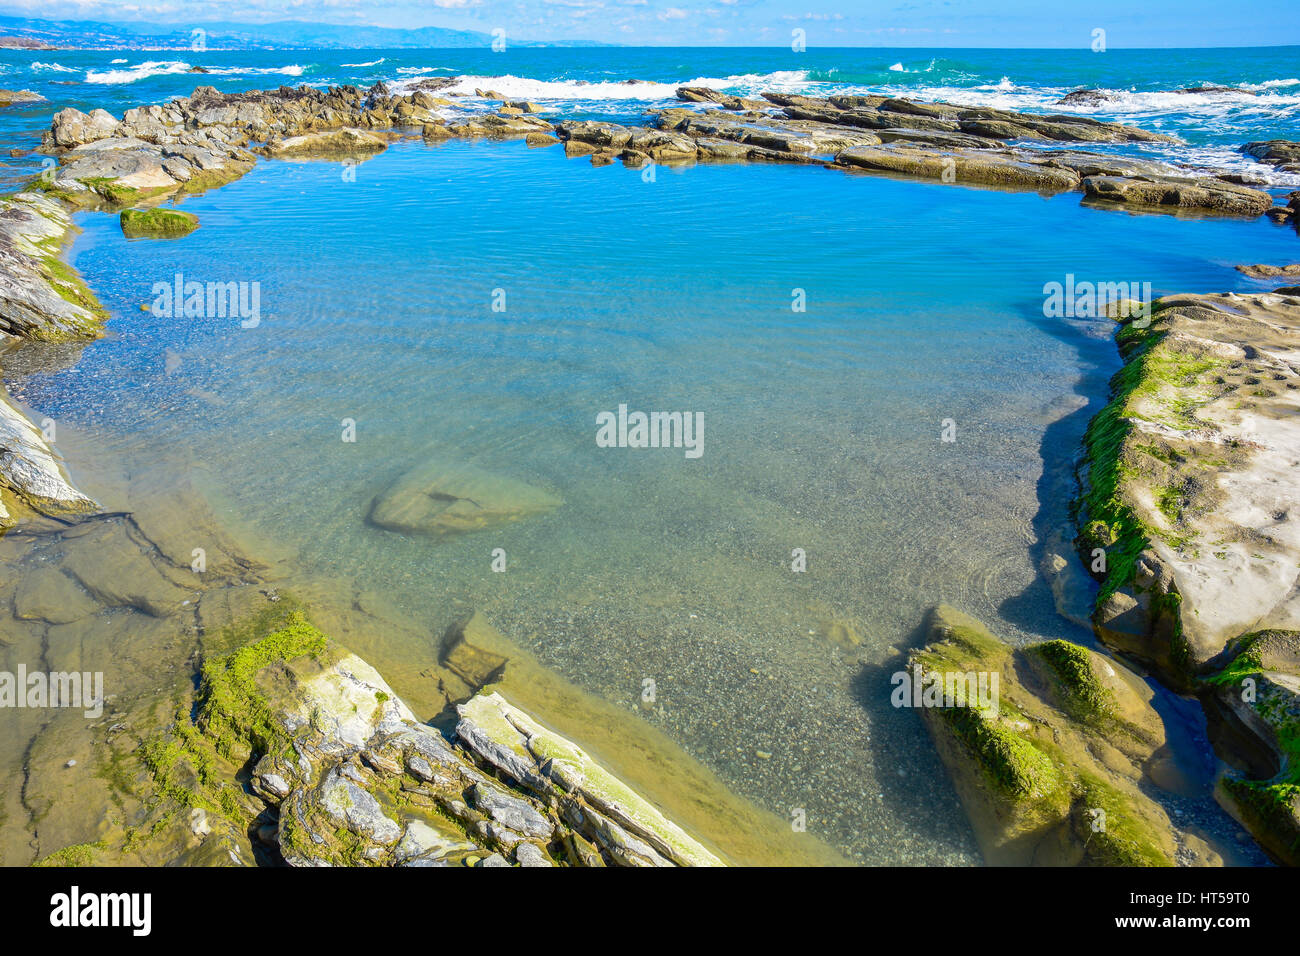 Beautiful landscape, seascape, amazing nature background with rocks and blue water. Stock Photo